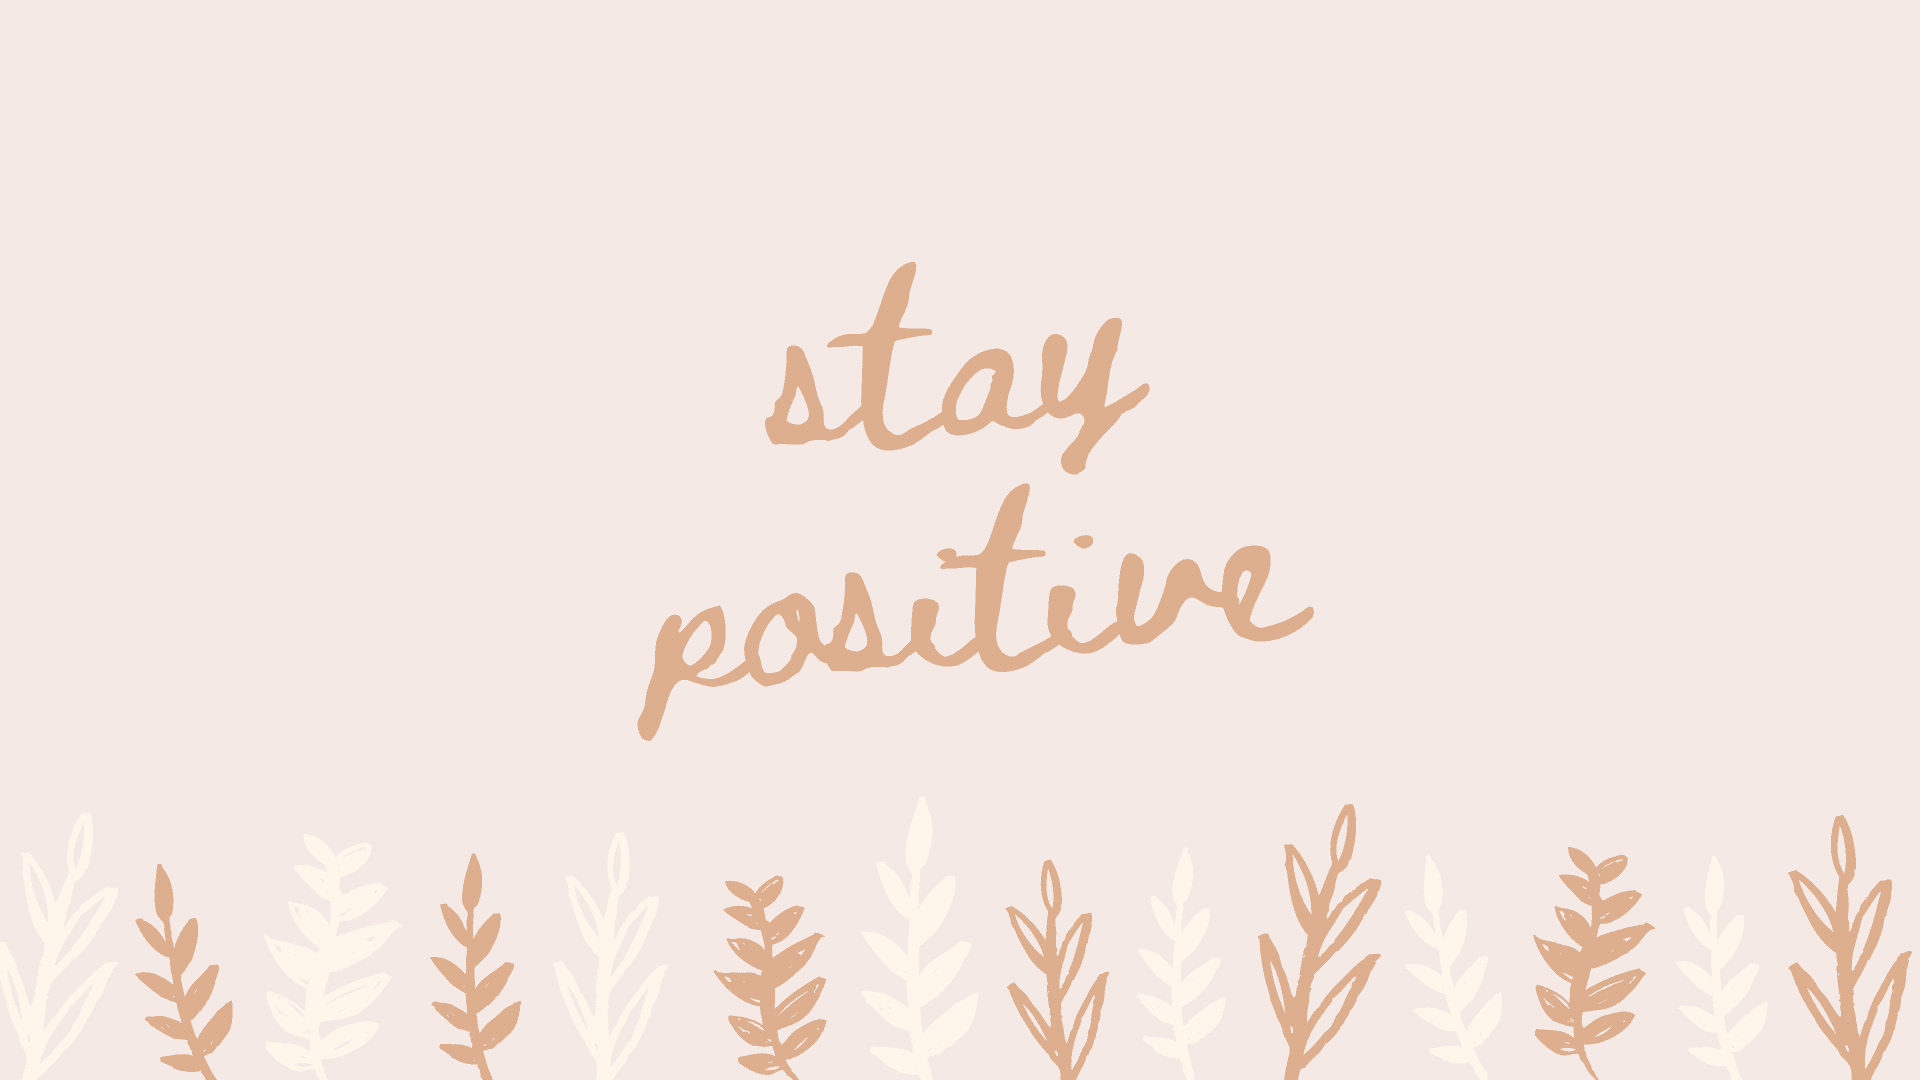 Celebrate positivity in everything you do!